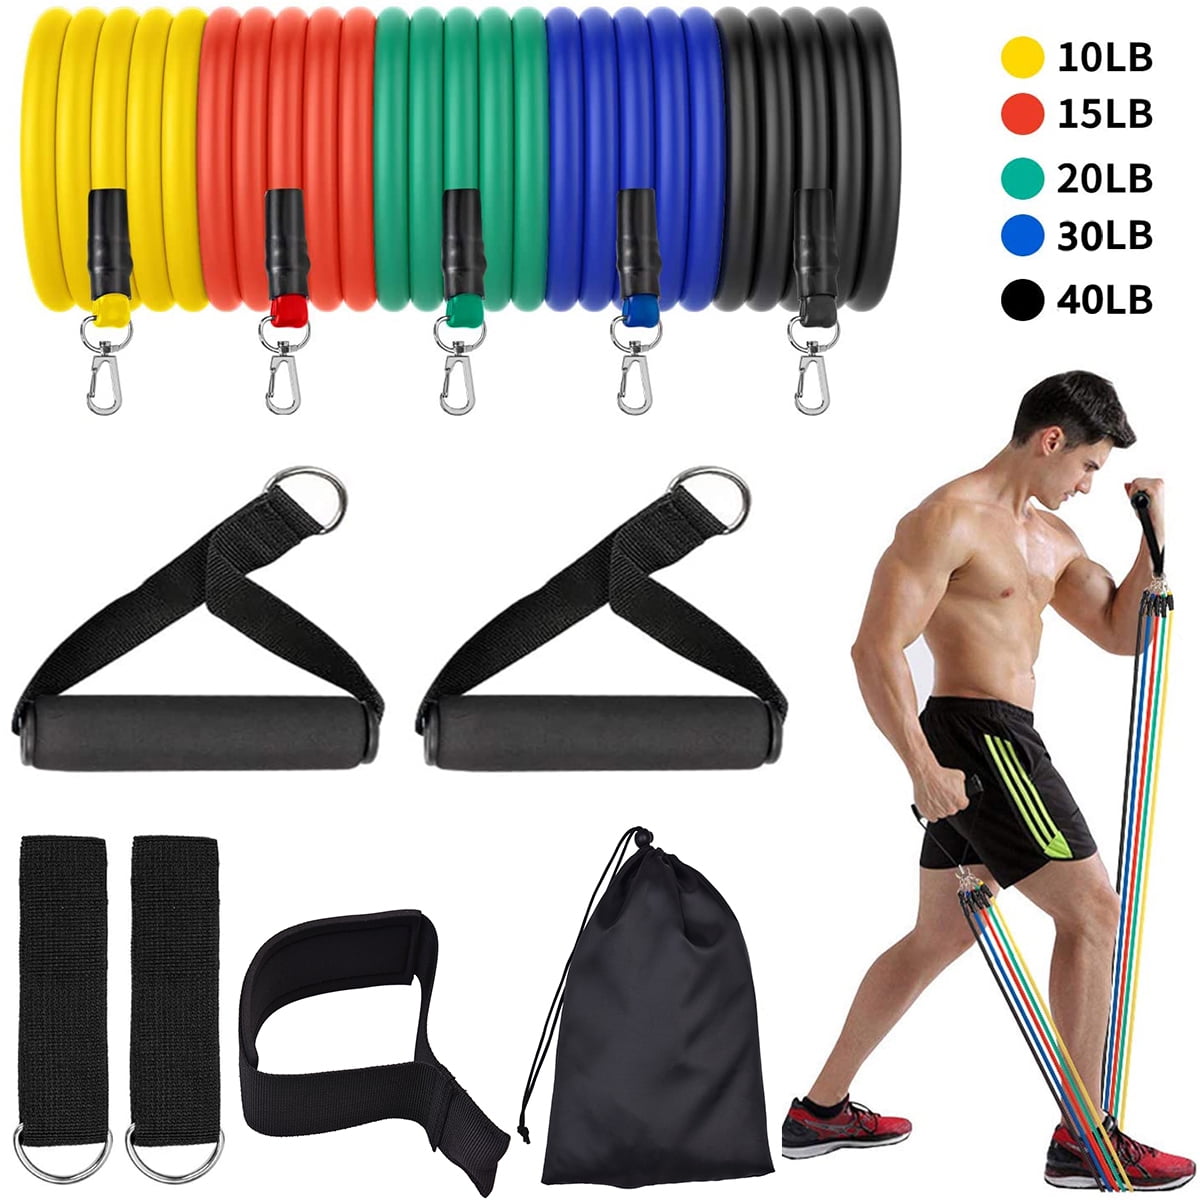 DISUPPO 11 PCS Resistance Bands Set Exercise Bands with Door Anchor Handles Ankle Strap and Carrying Bag